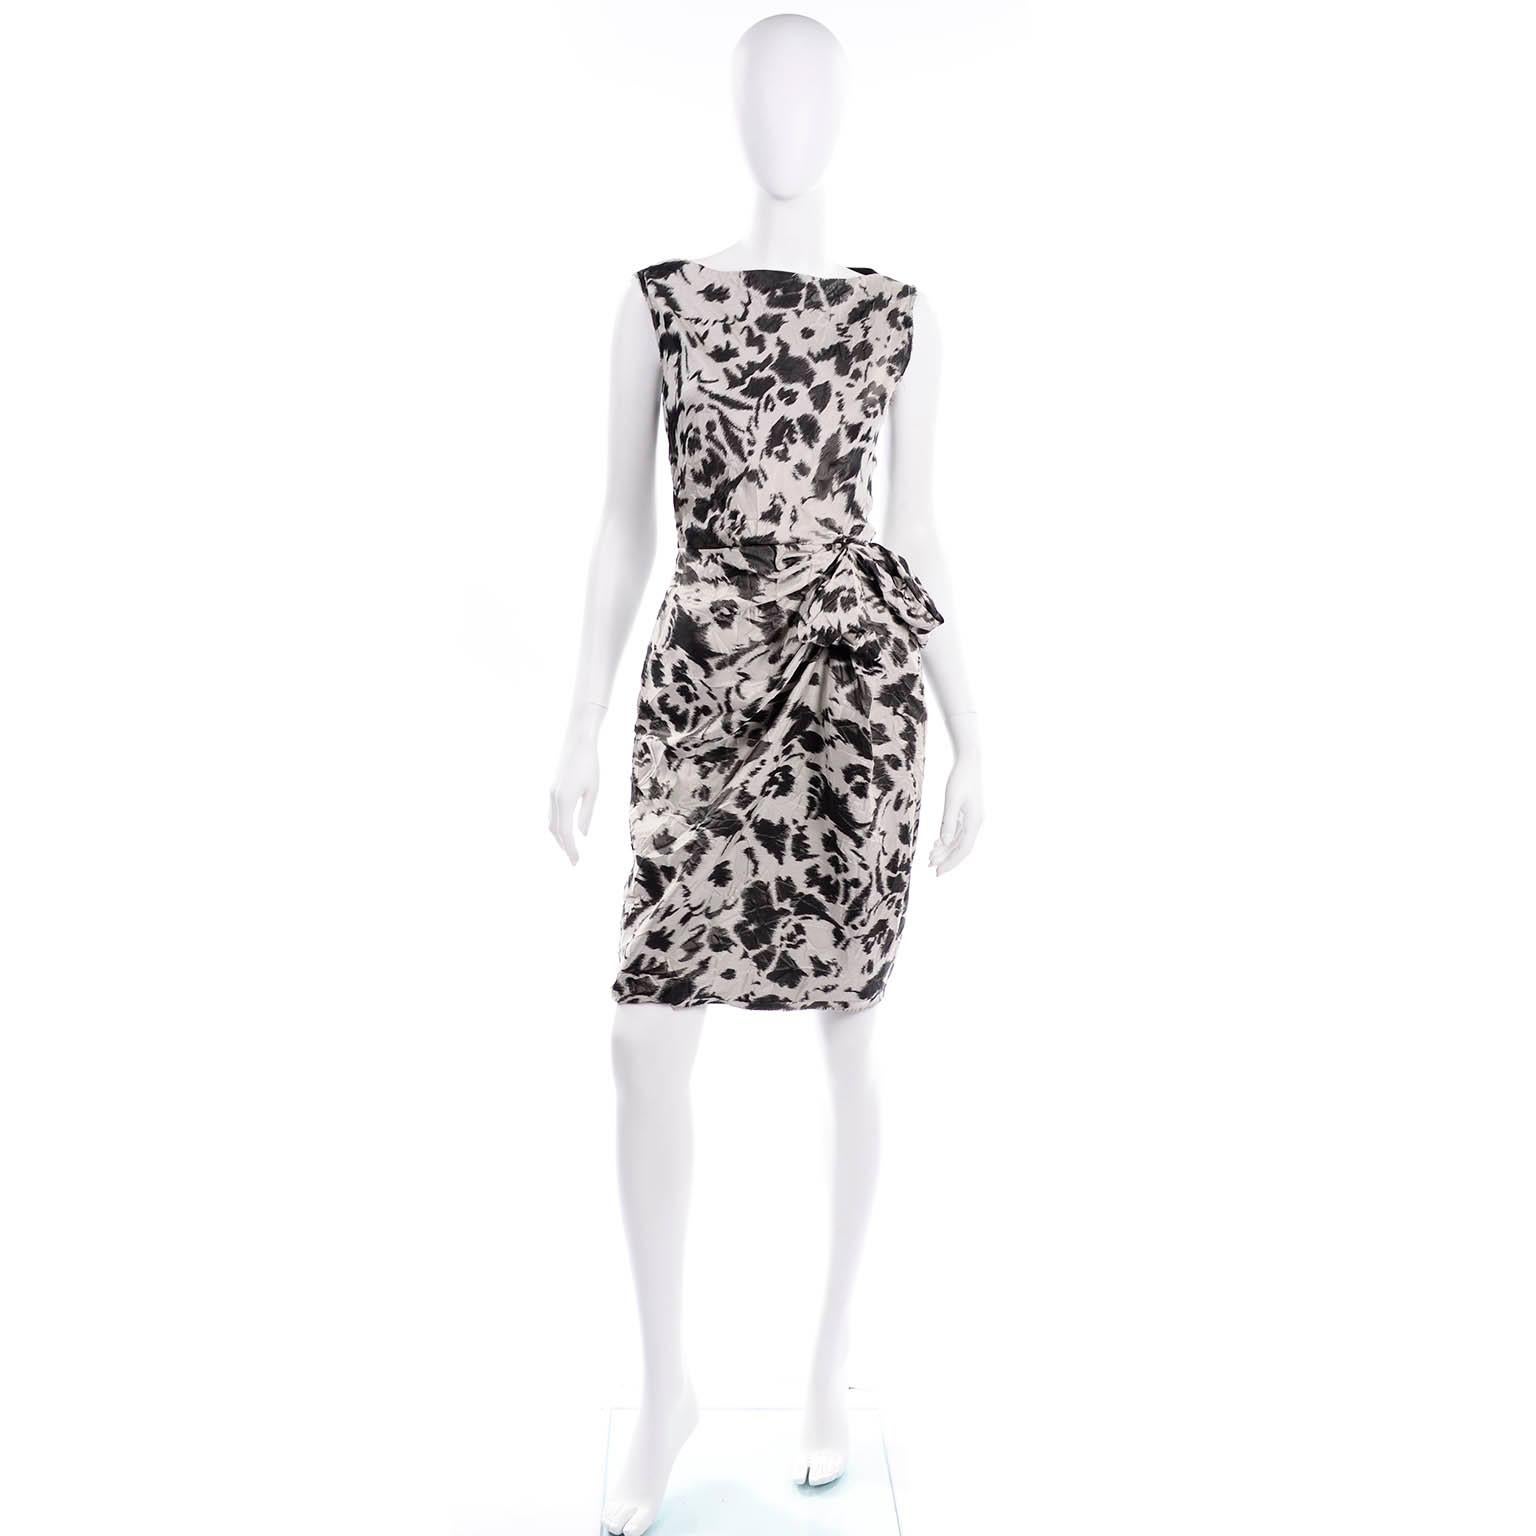 This is a lovely Lanvin summer 2011 sleeveless gray and black abstract floral print dress with intentional set in wrinkles  This dress has raw edges, draping on one side with a bow, and an external side zipper. Wear it to lunch or dinner, depending